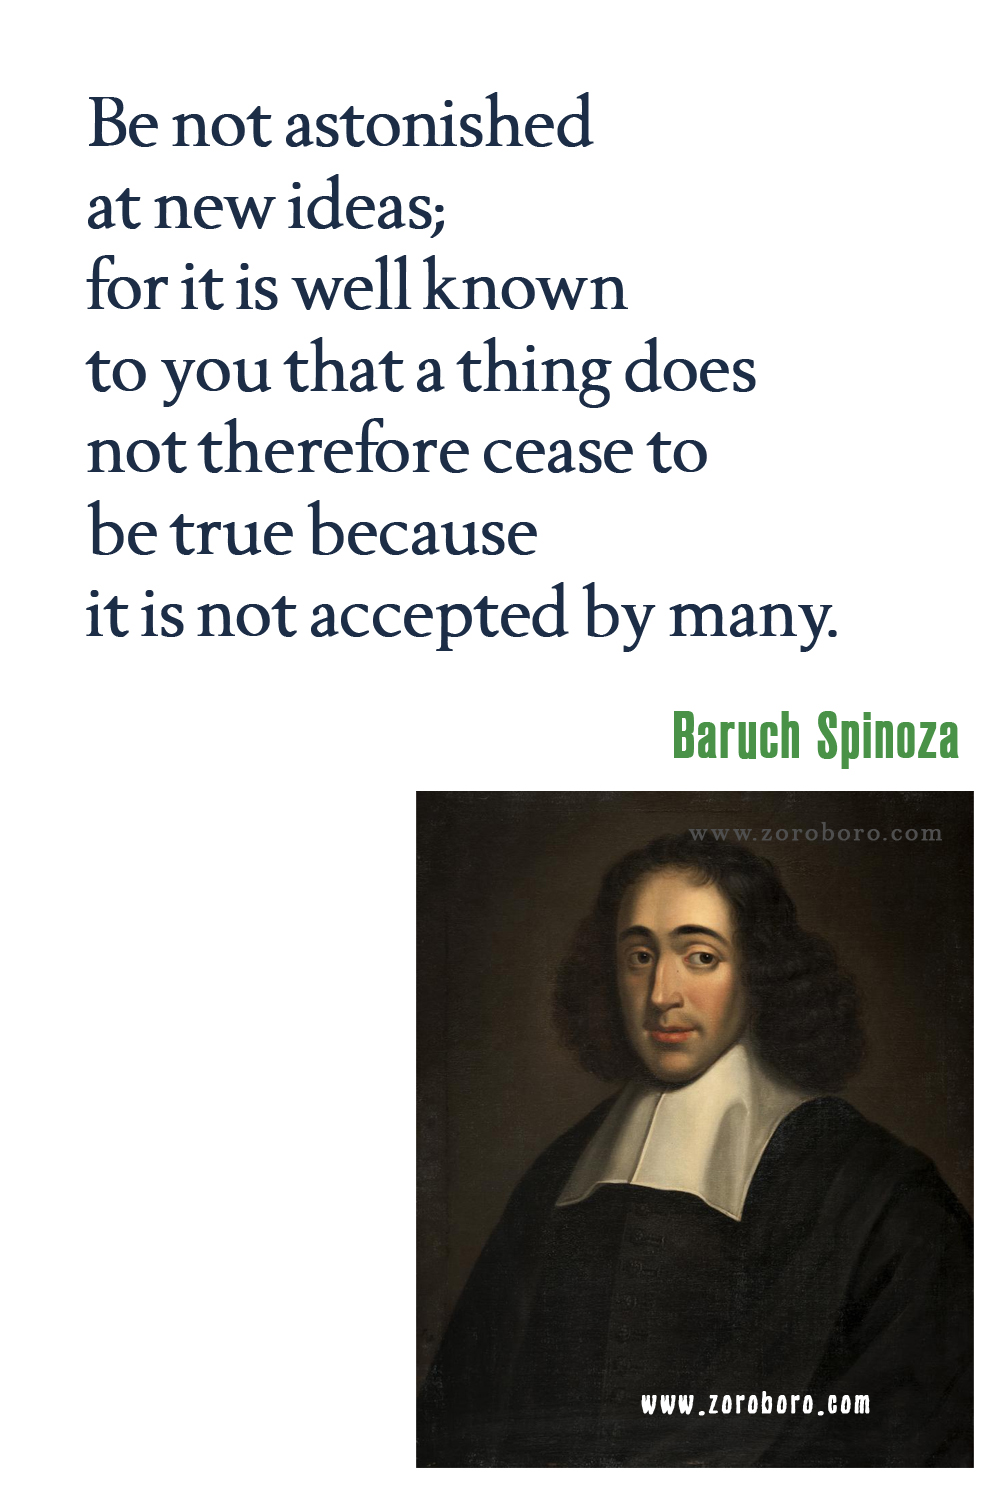 Baruch Spinoza Quotes, Atheism, Desire, Emotions, Life, & Virtue Quotes, Baruch Spinoza Philosophy. Baruch Spinoza Books Quotes, Baruch Spinoza Ethics Quotes.